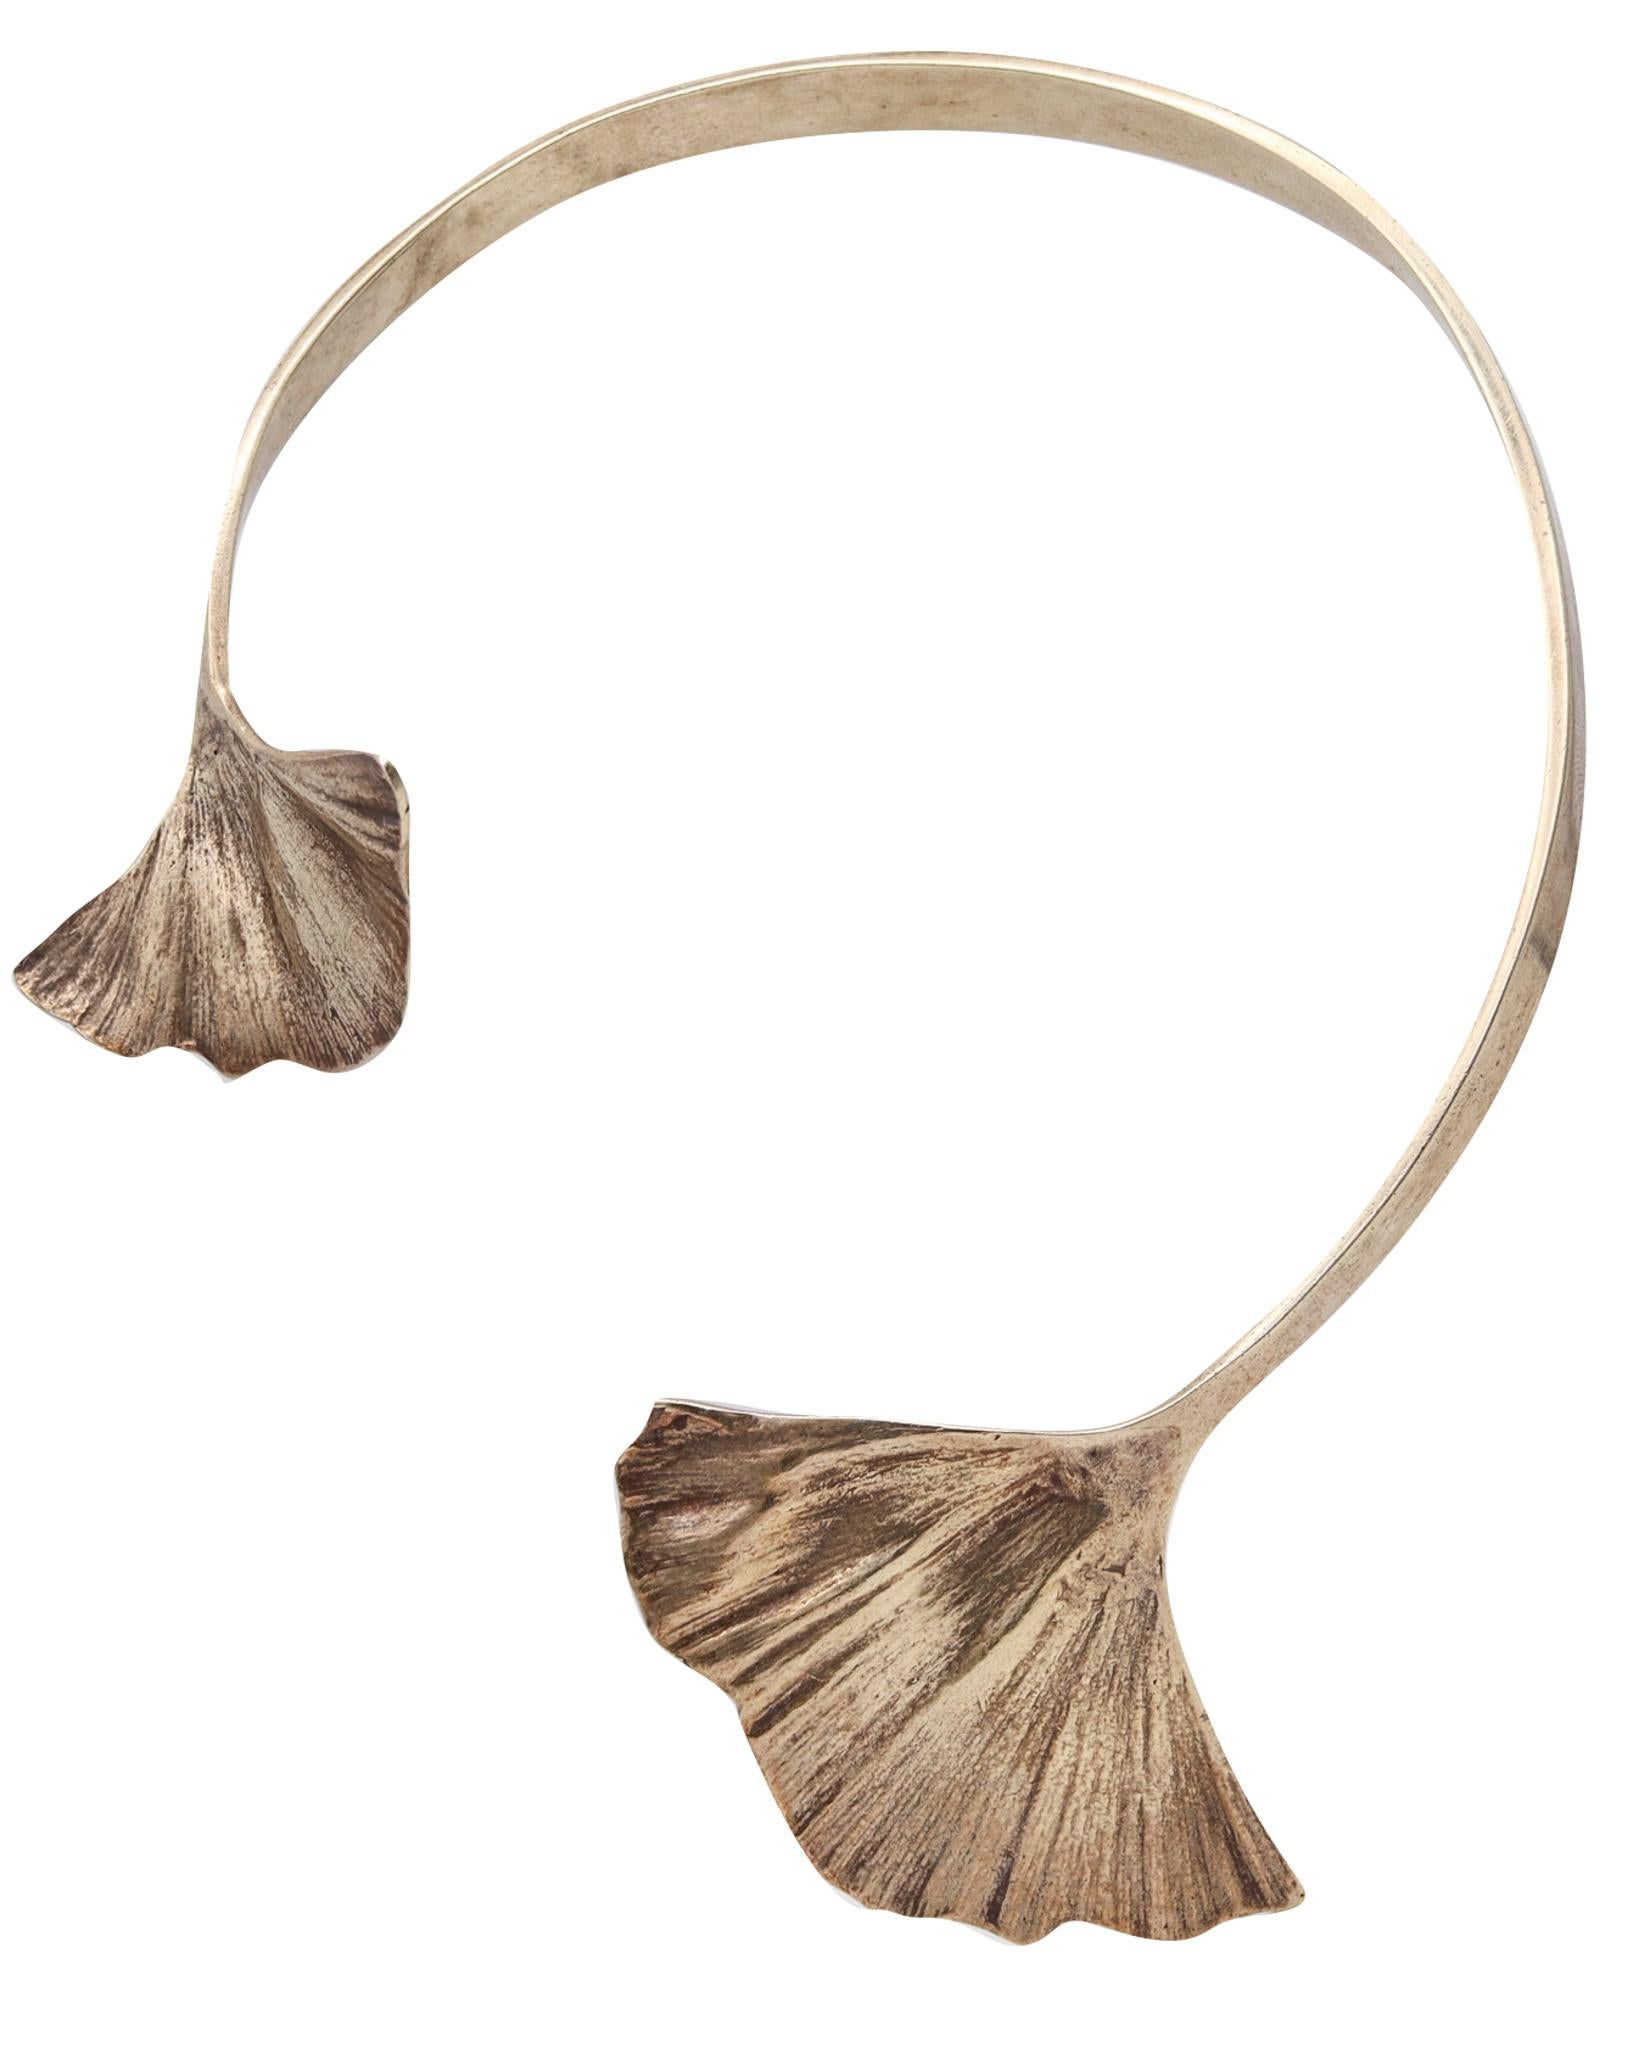 Paul Oudet 1970 Prototype Gingko Cuff Necklace in 18kt Gilt Vermeil over Silver For Sale